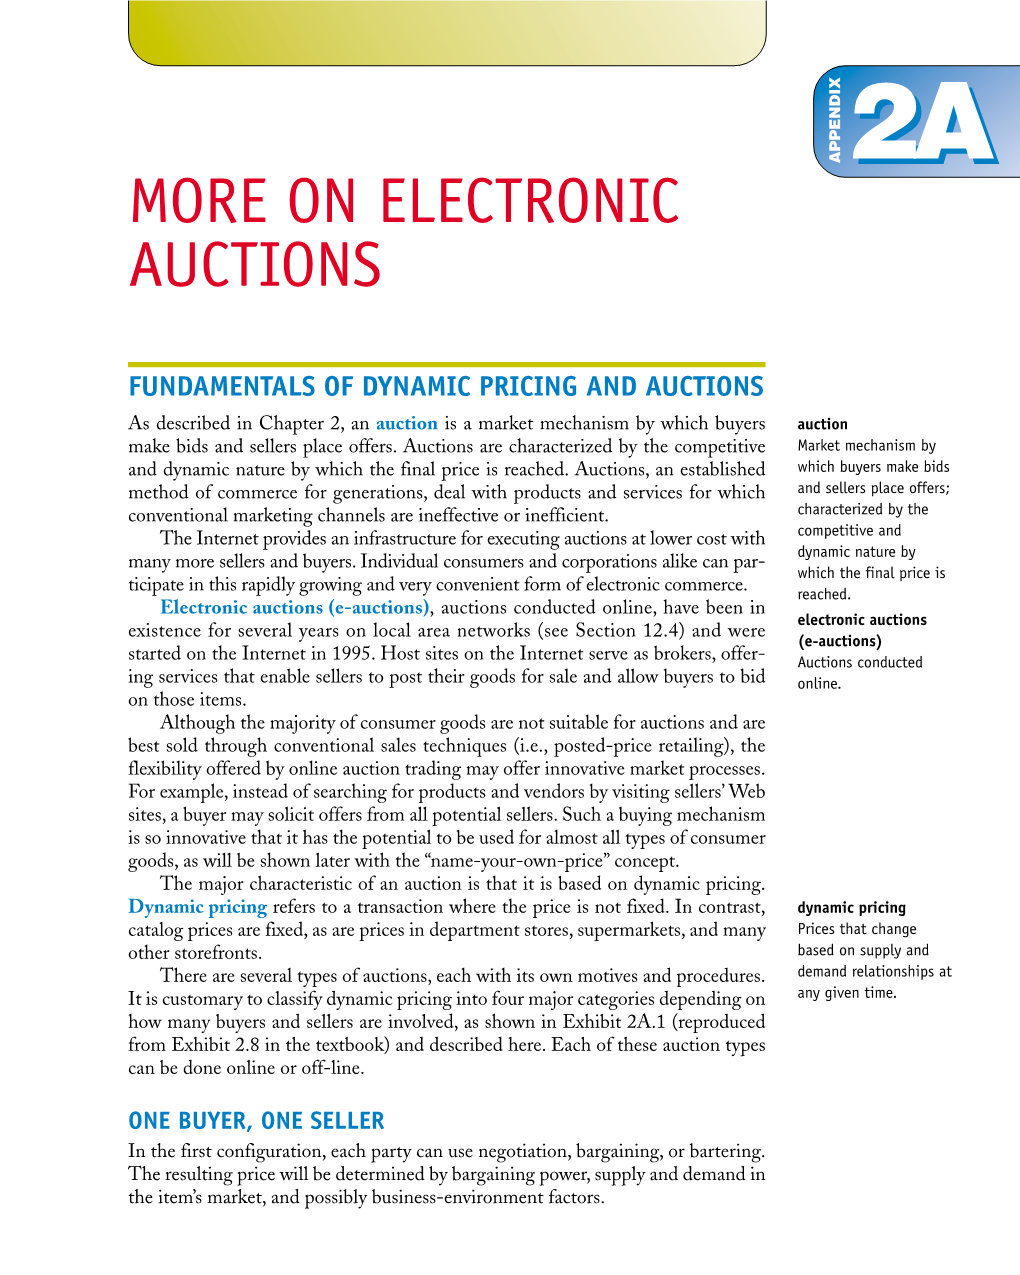 On Electronic Auctions